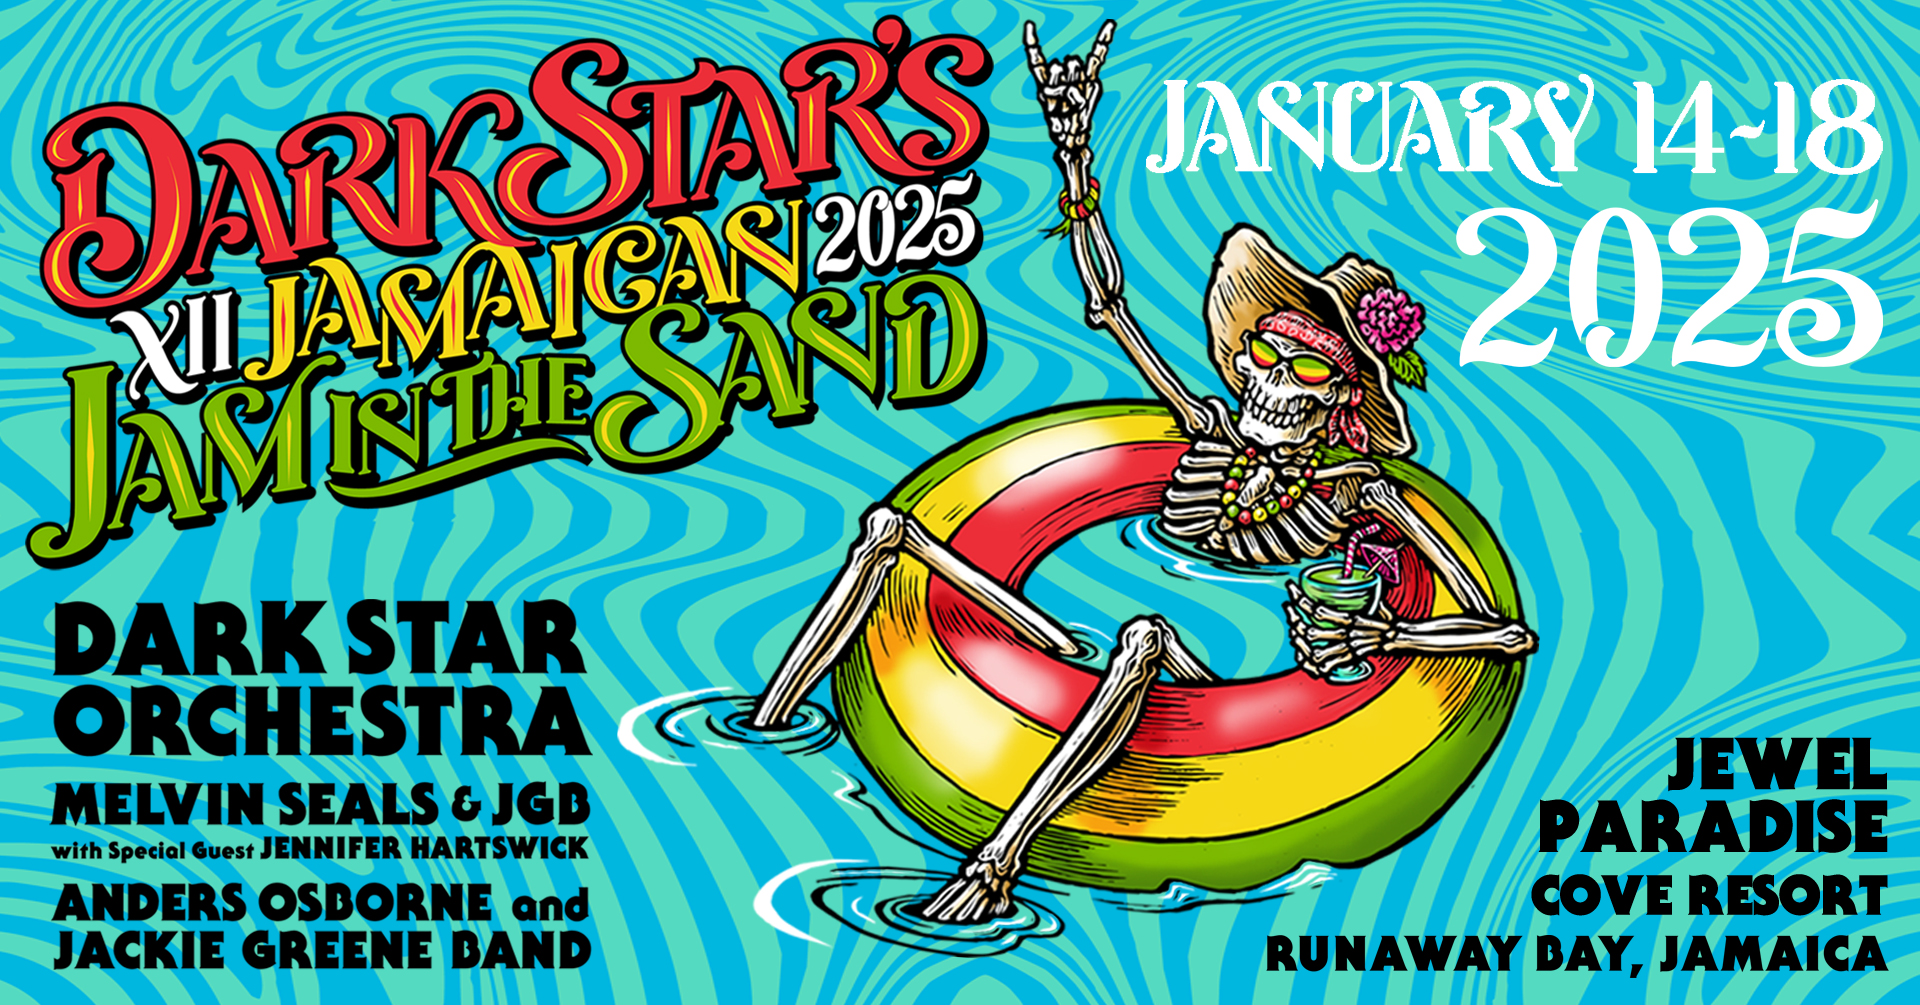 Dark Star Orchestra Returns to Jamaica for Jam in the Sand XII